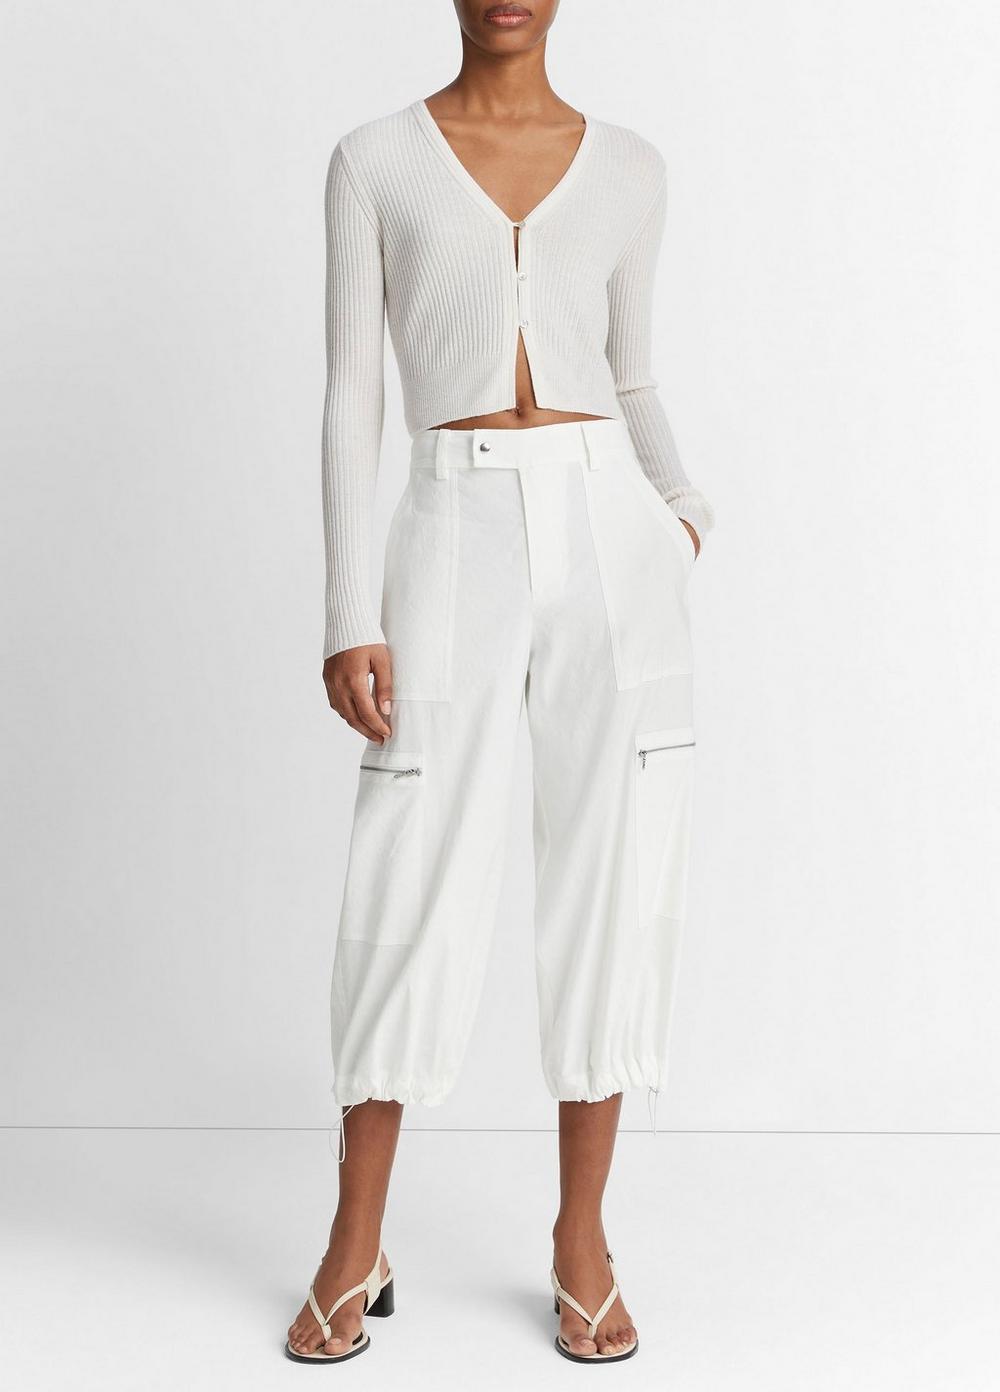 Low-Rise Cropped Parachute Pant, Off White, Size 6 Vince